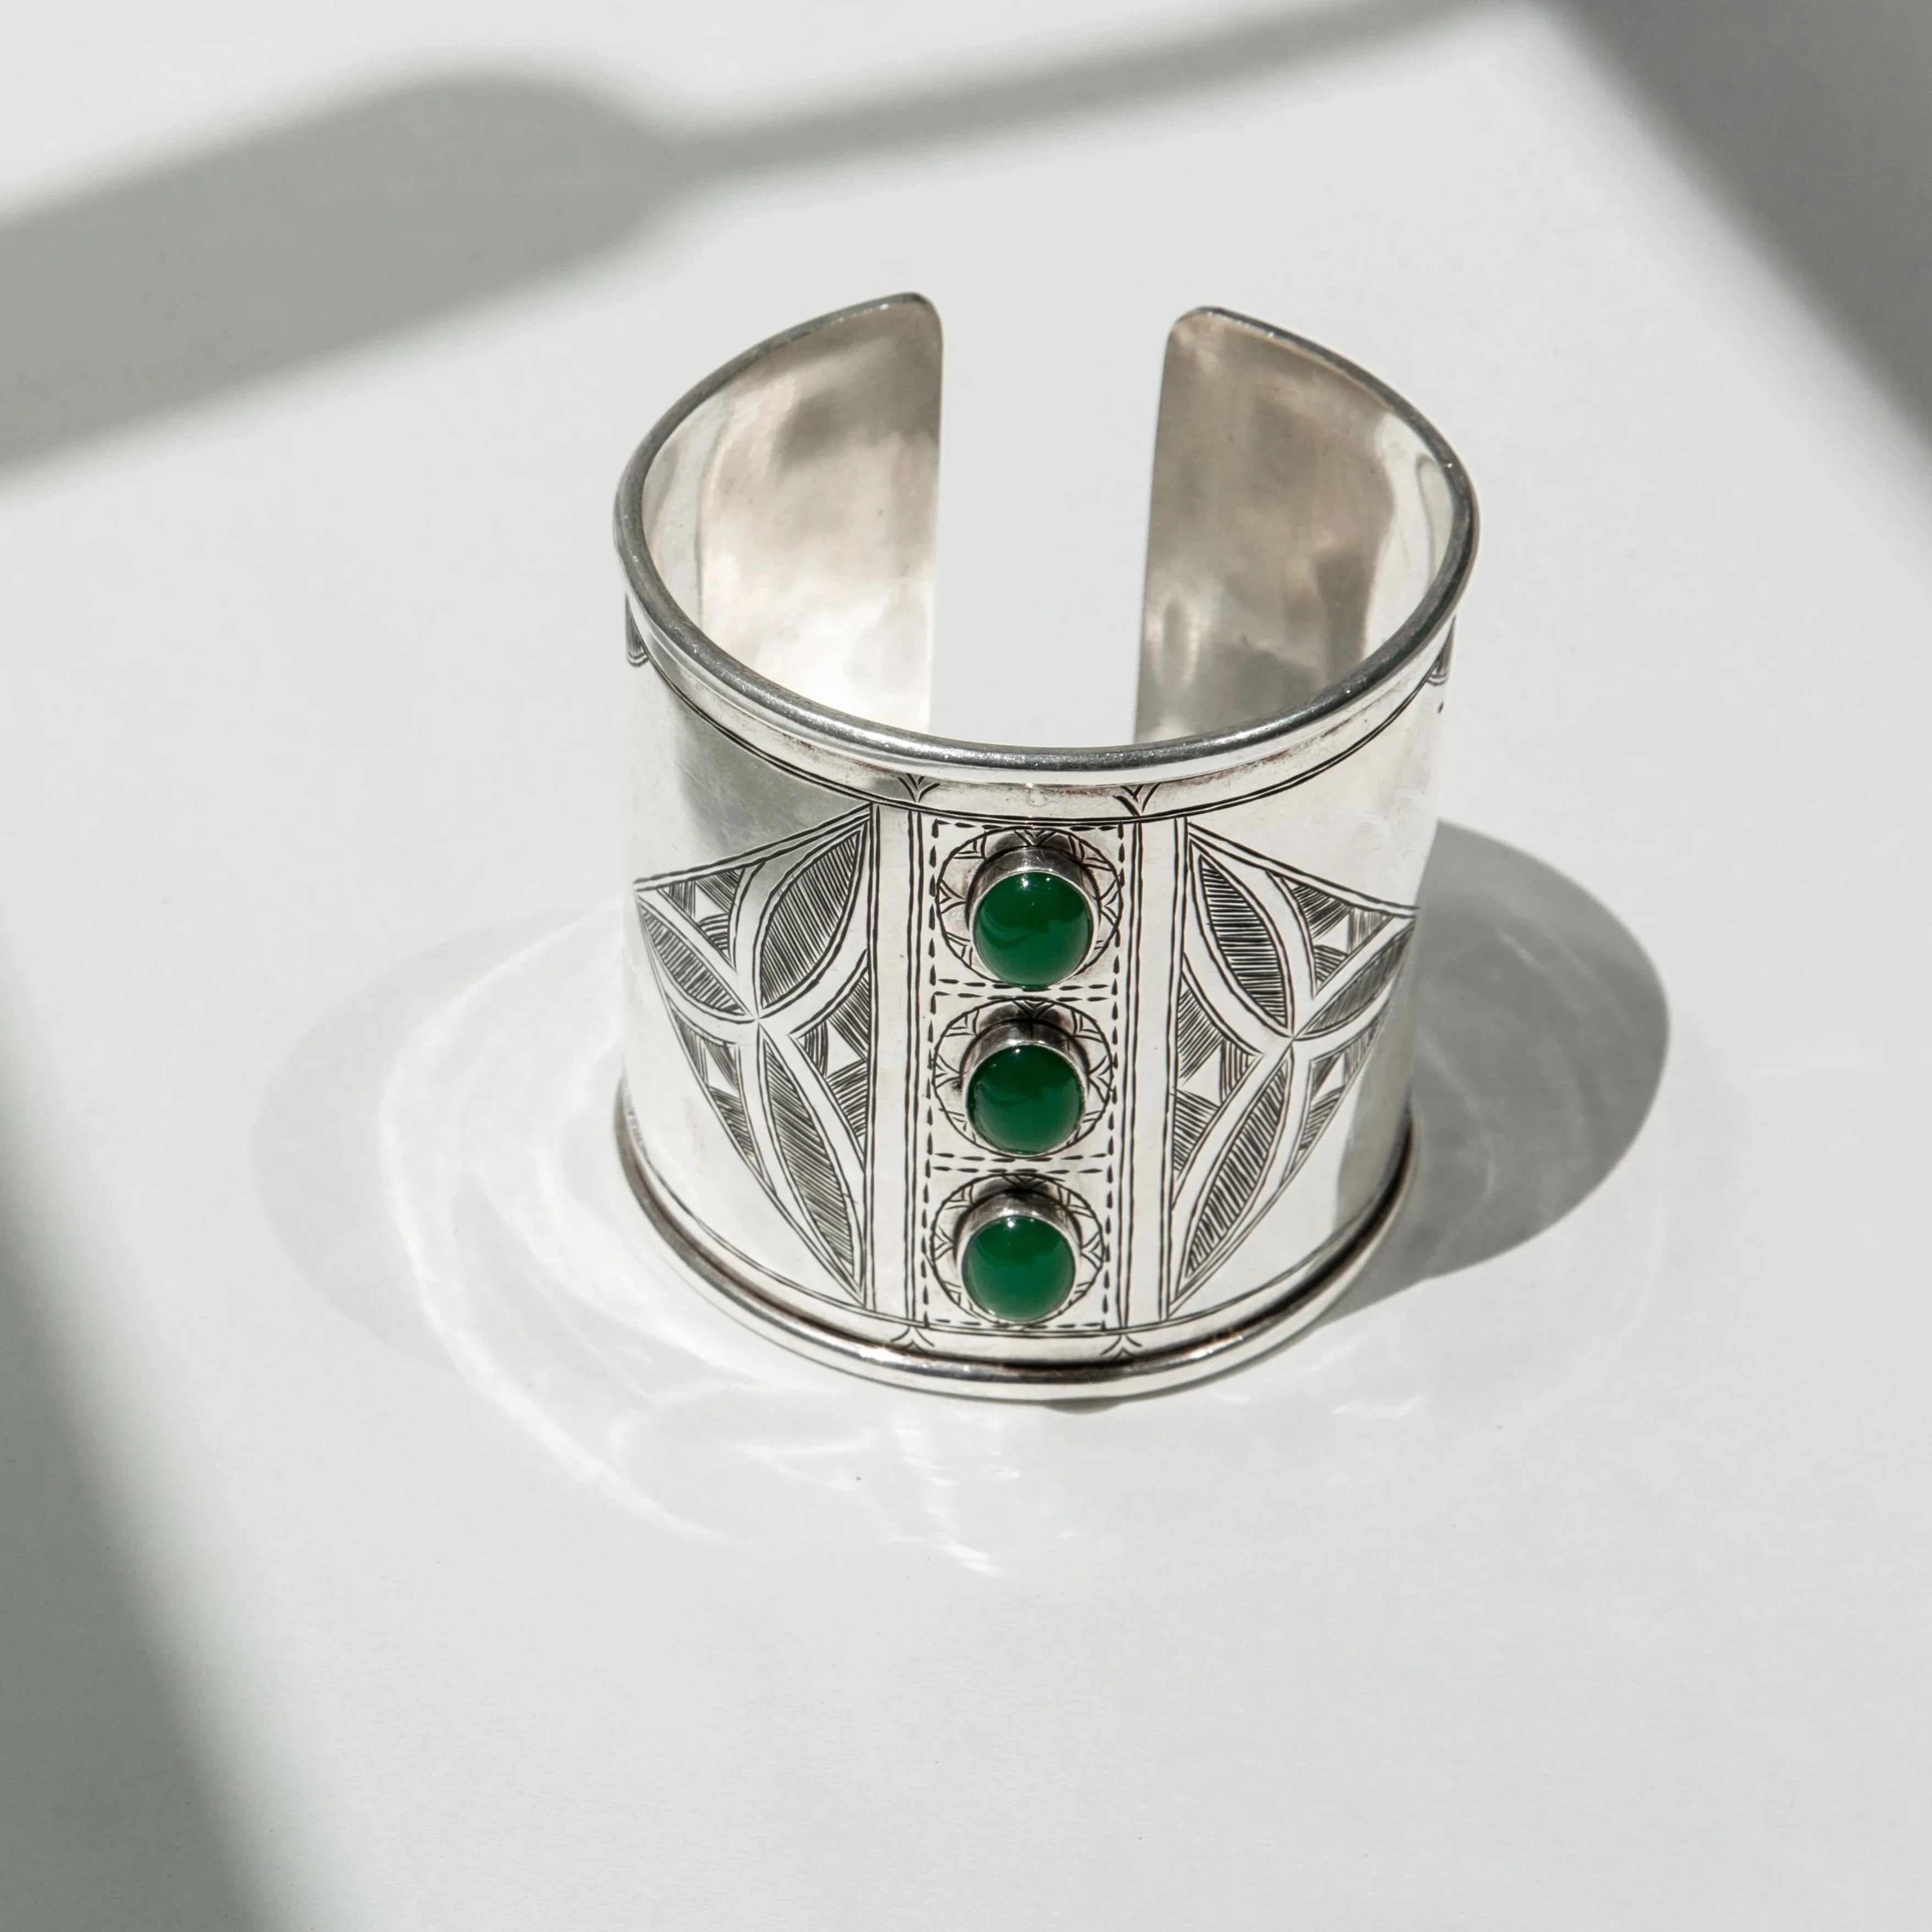 Mint Tea Cuff Bracelet: Moroccan-inspired elegance, Symbol of hospitality, Handcrafted beauty, Timeless accessory.